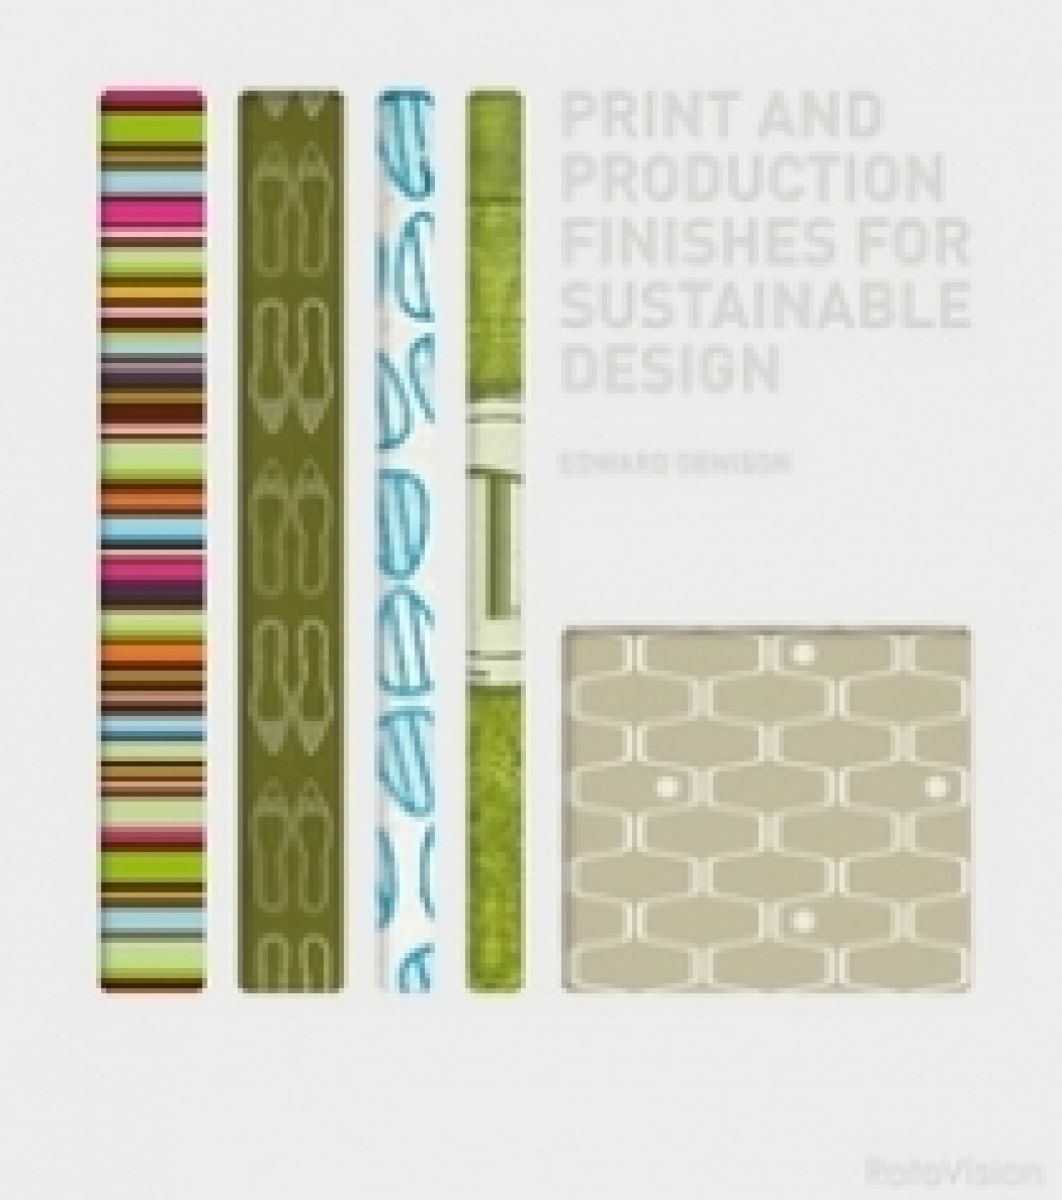 Denison Edward Print and Production Finishes for Sustainable Design 